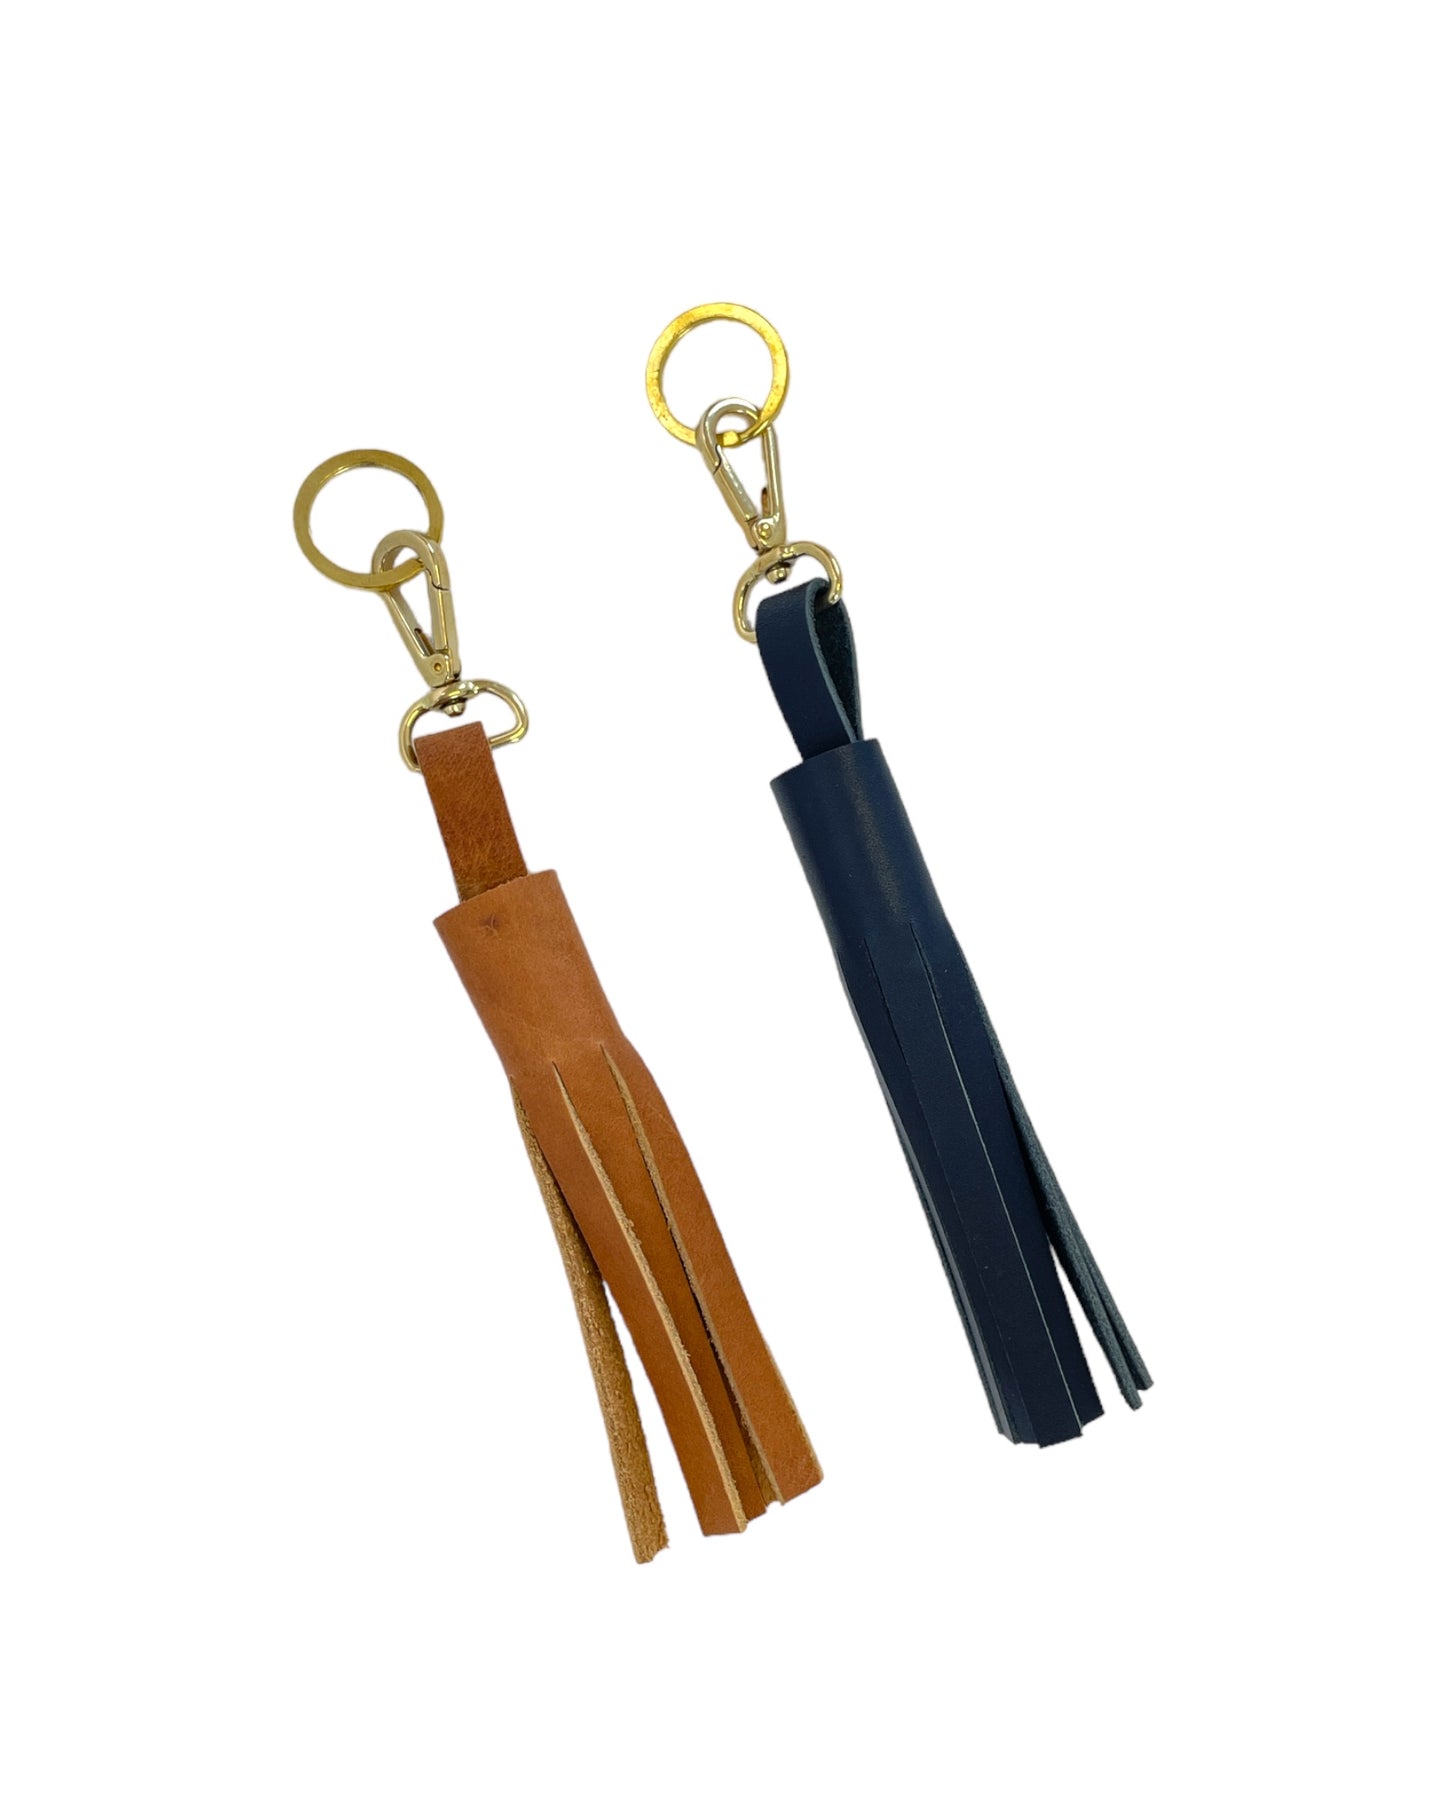 Leather Tassel Key Chain- Wholesale Leather Bag - handcrafted by Market Canvas Leather in Tofino, BC, Canada